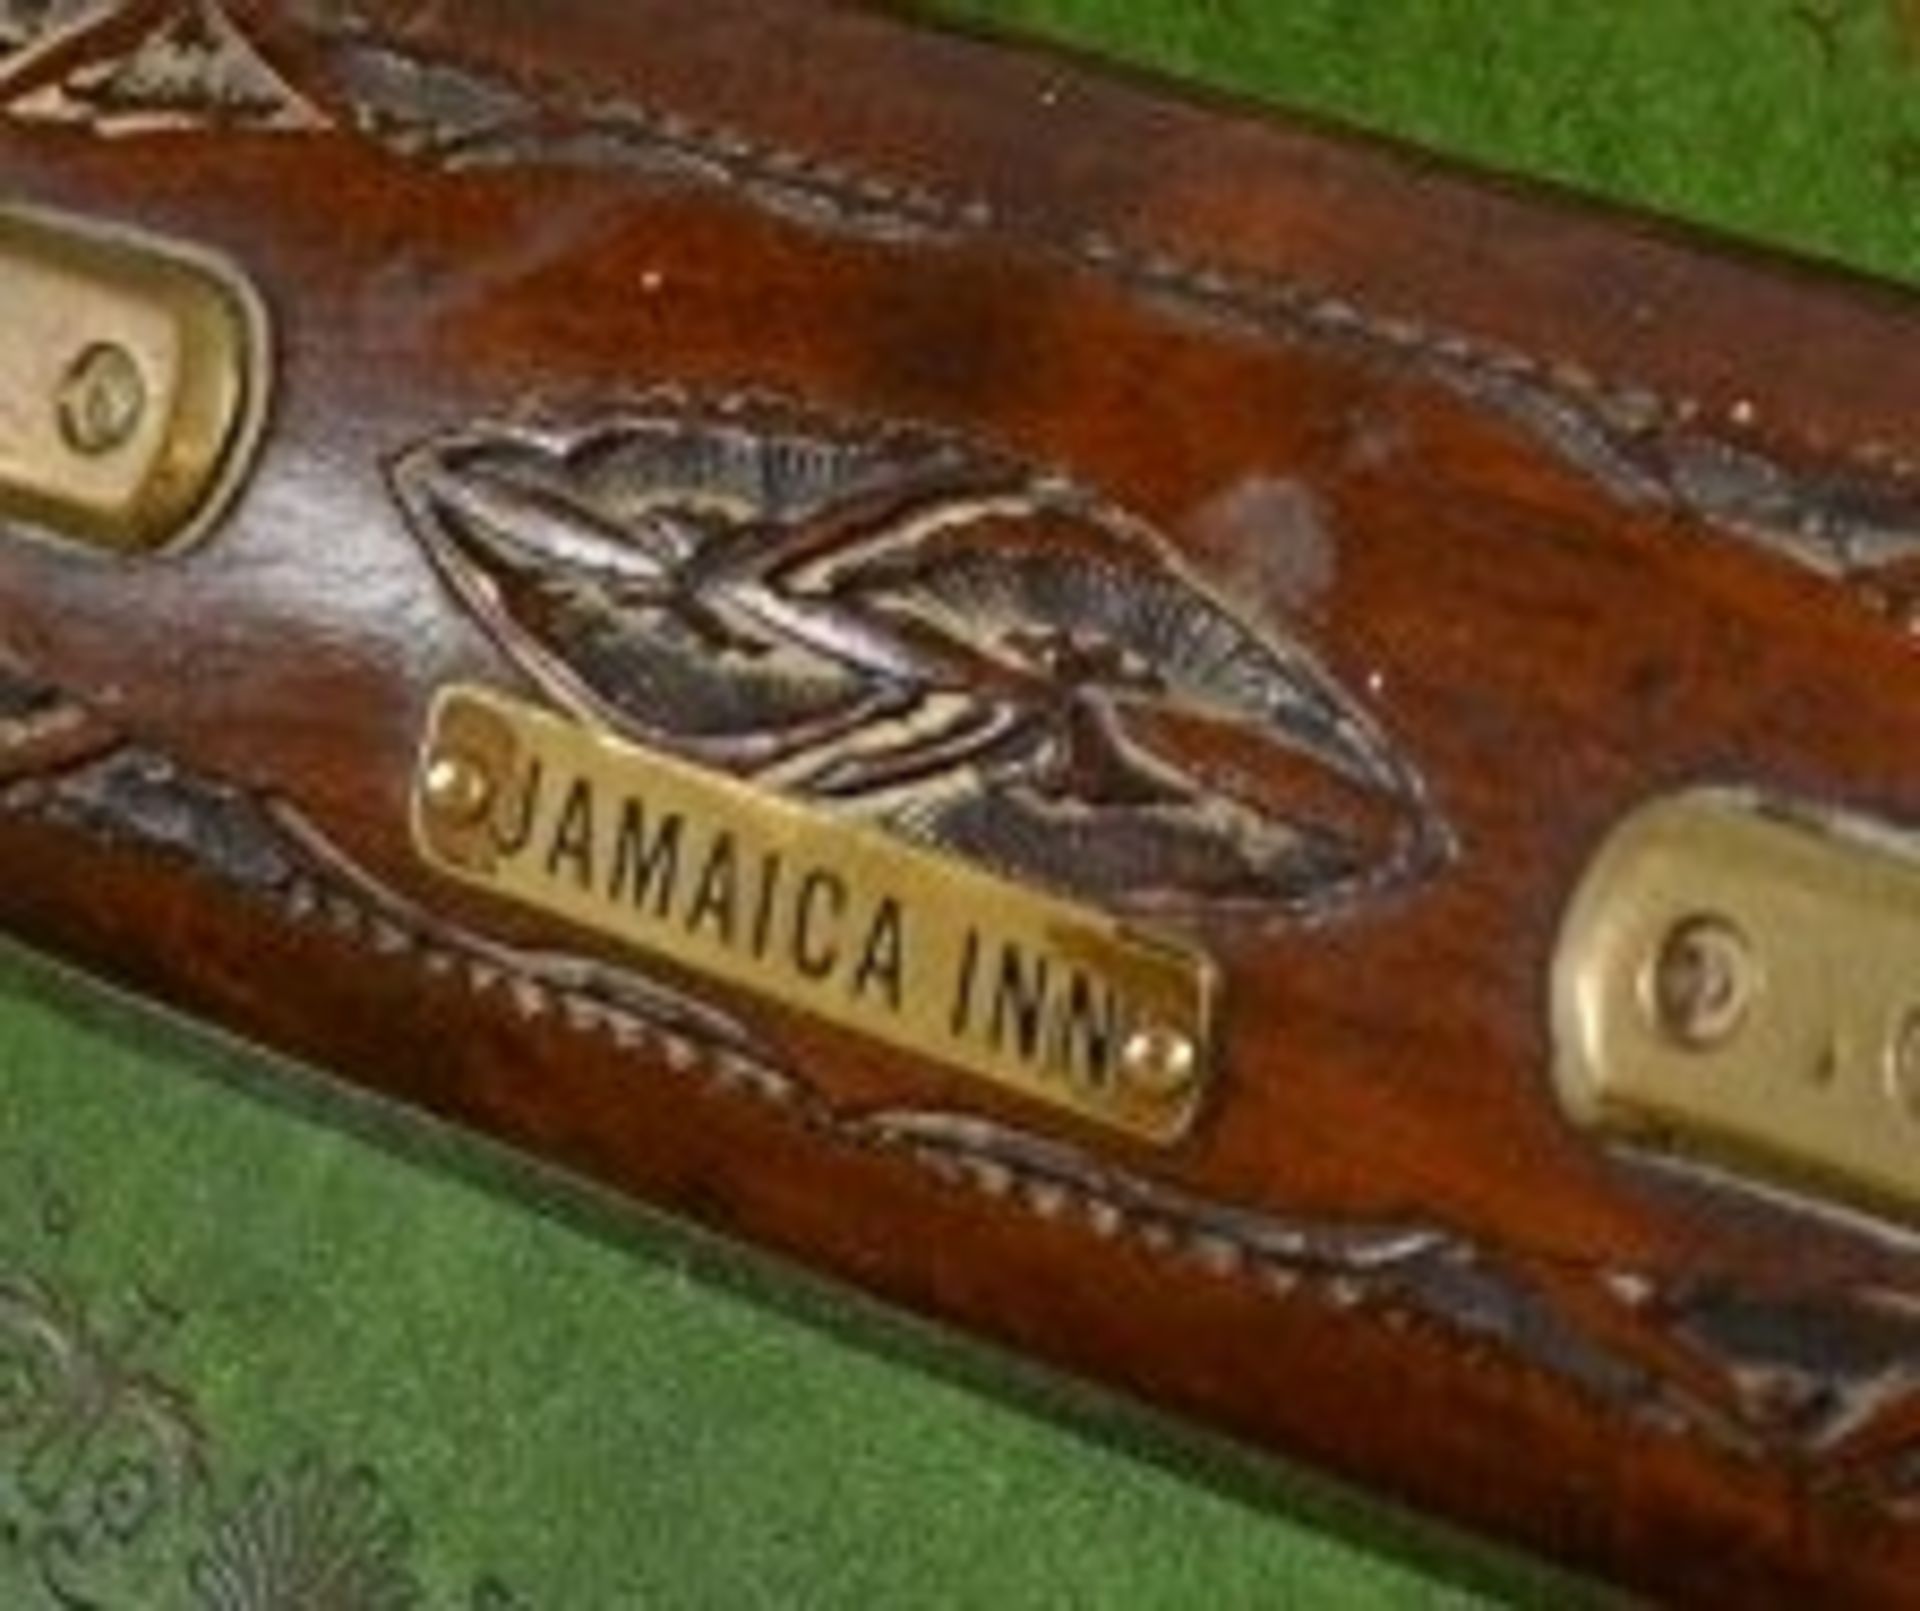 1 x Vintage "Jamaica Inn" Branded Souvenir Knife / Fork - From A Grade II Listed Hall In Fair - Image 2 of 5